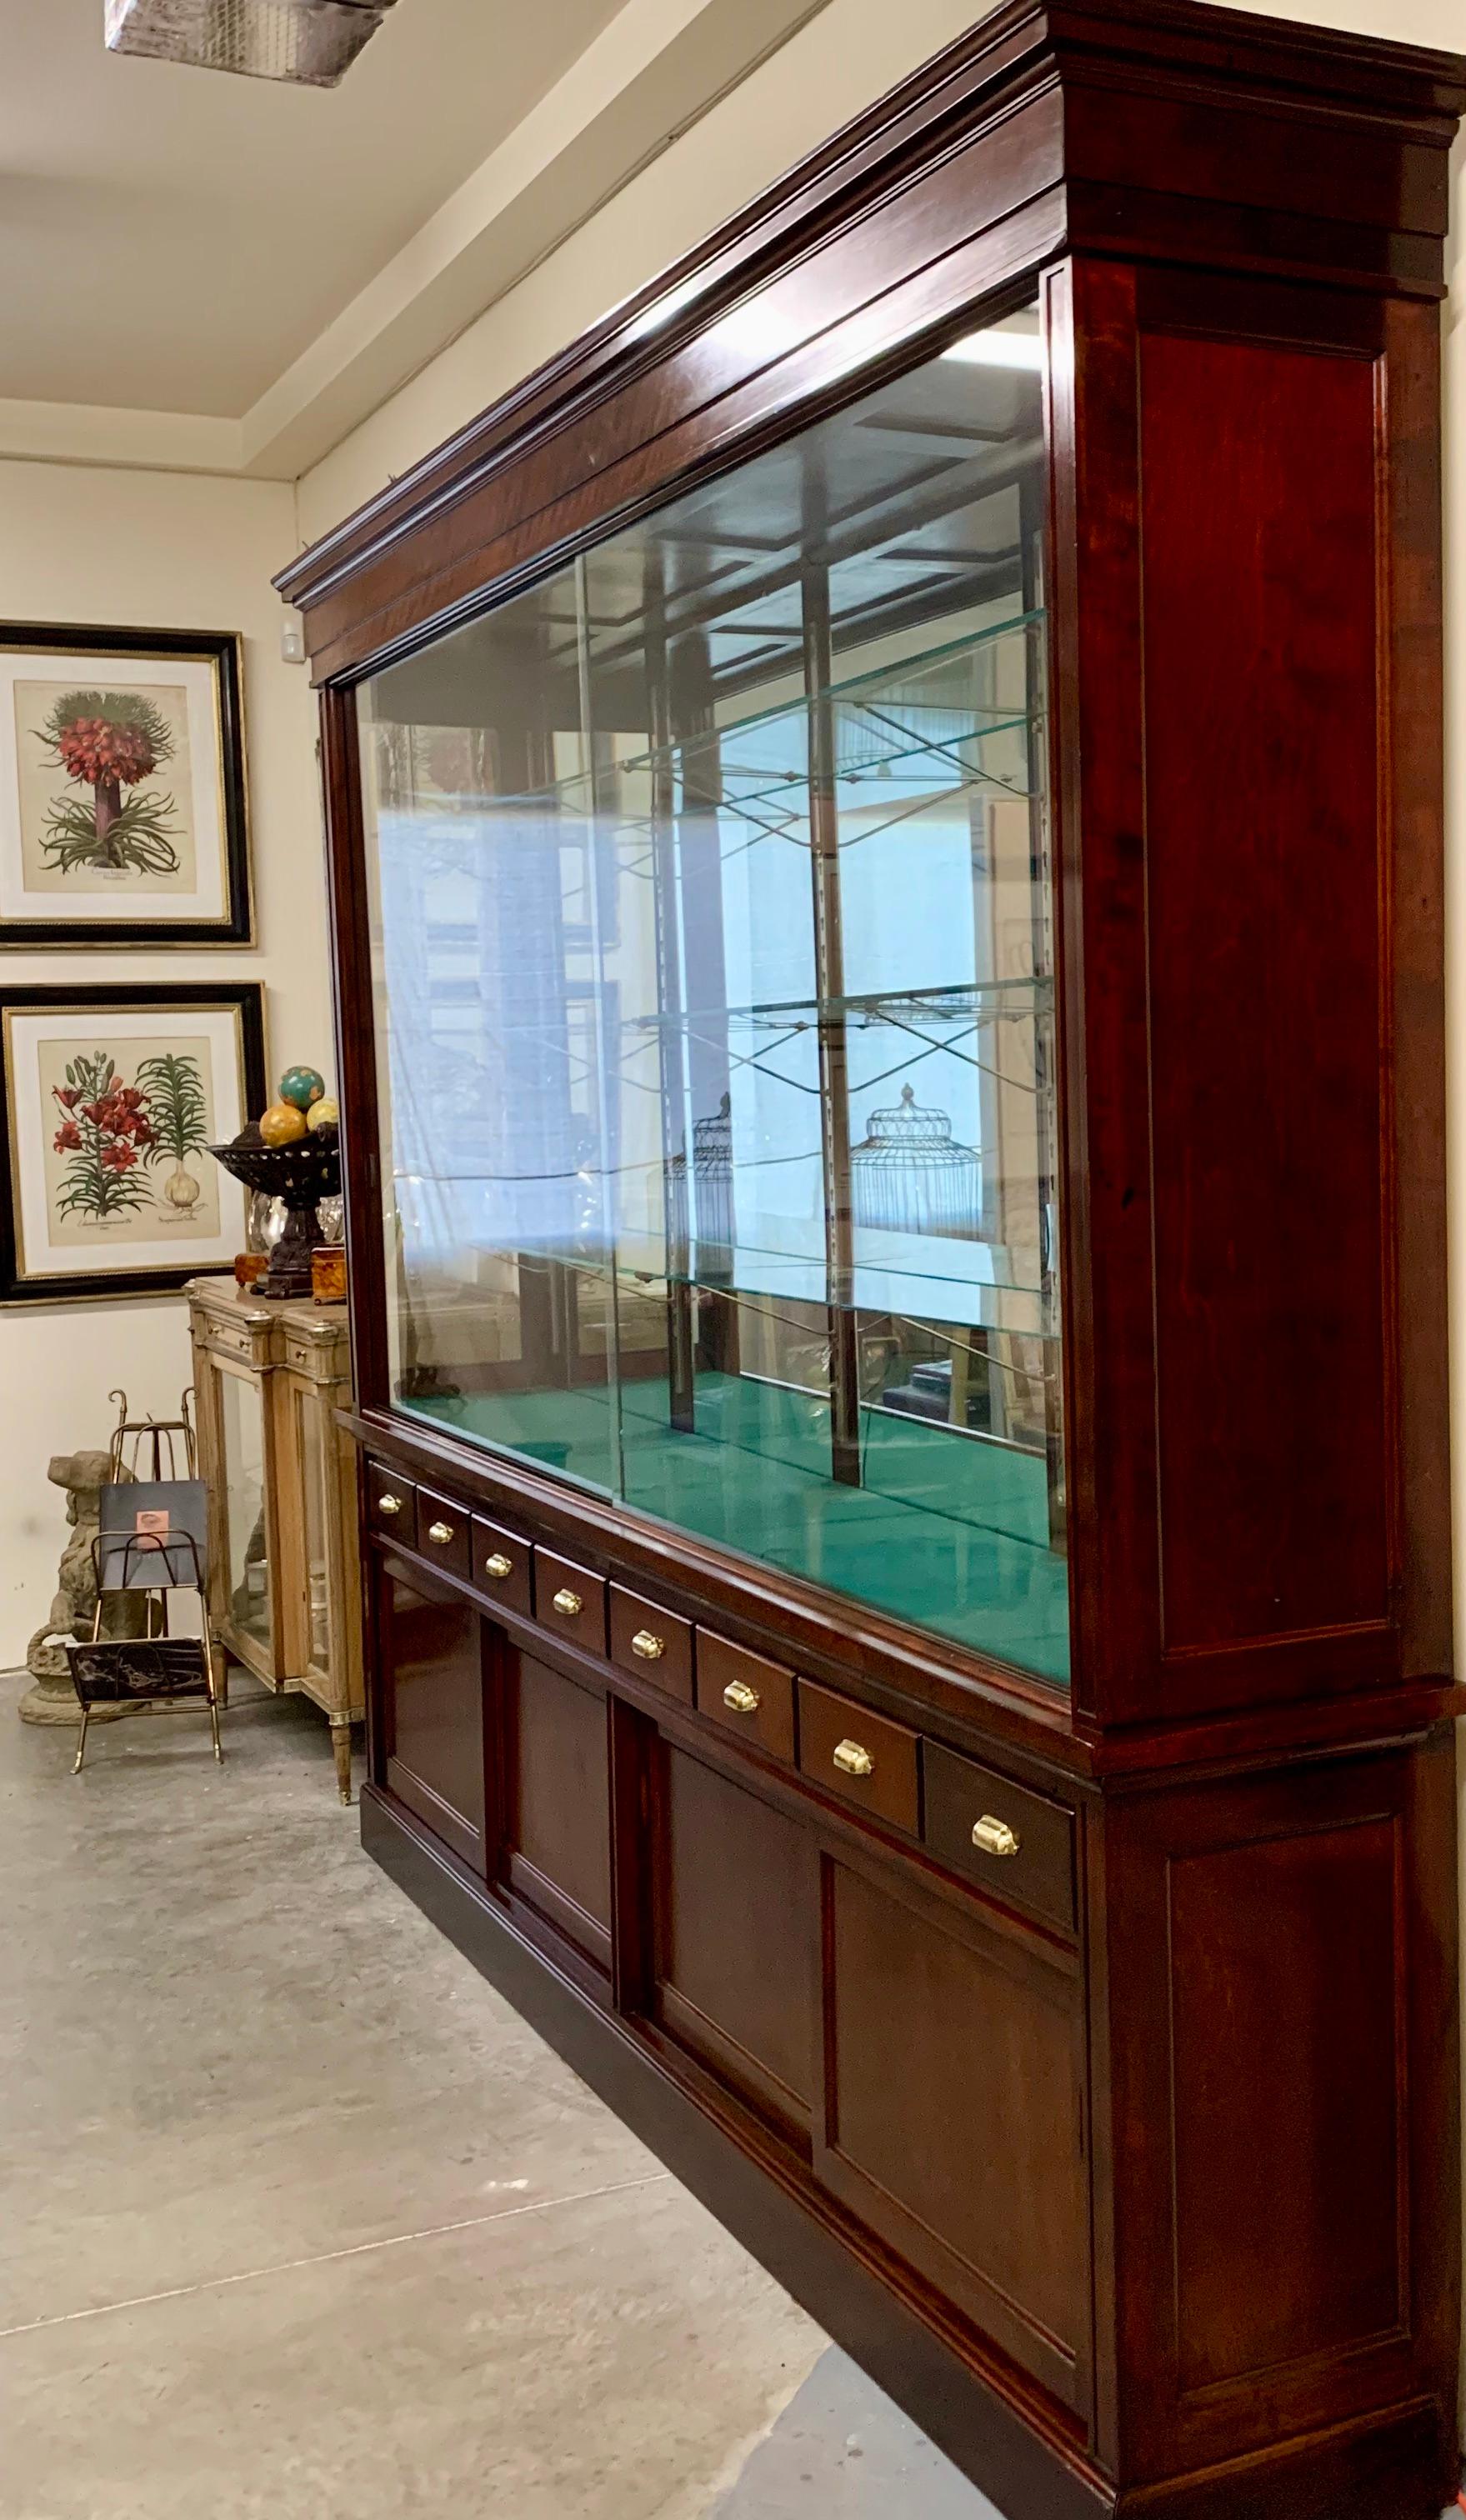 Large mahogany display cabinet made by the Joslin Showcase Company of Boston, Massachusetts. The company was founded in 1893. The cabinet is made it two pieces. The upper part has three glass shelves plus the bottom wooden shelf. The base has six